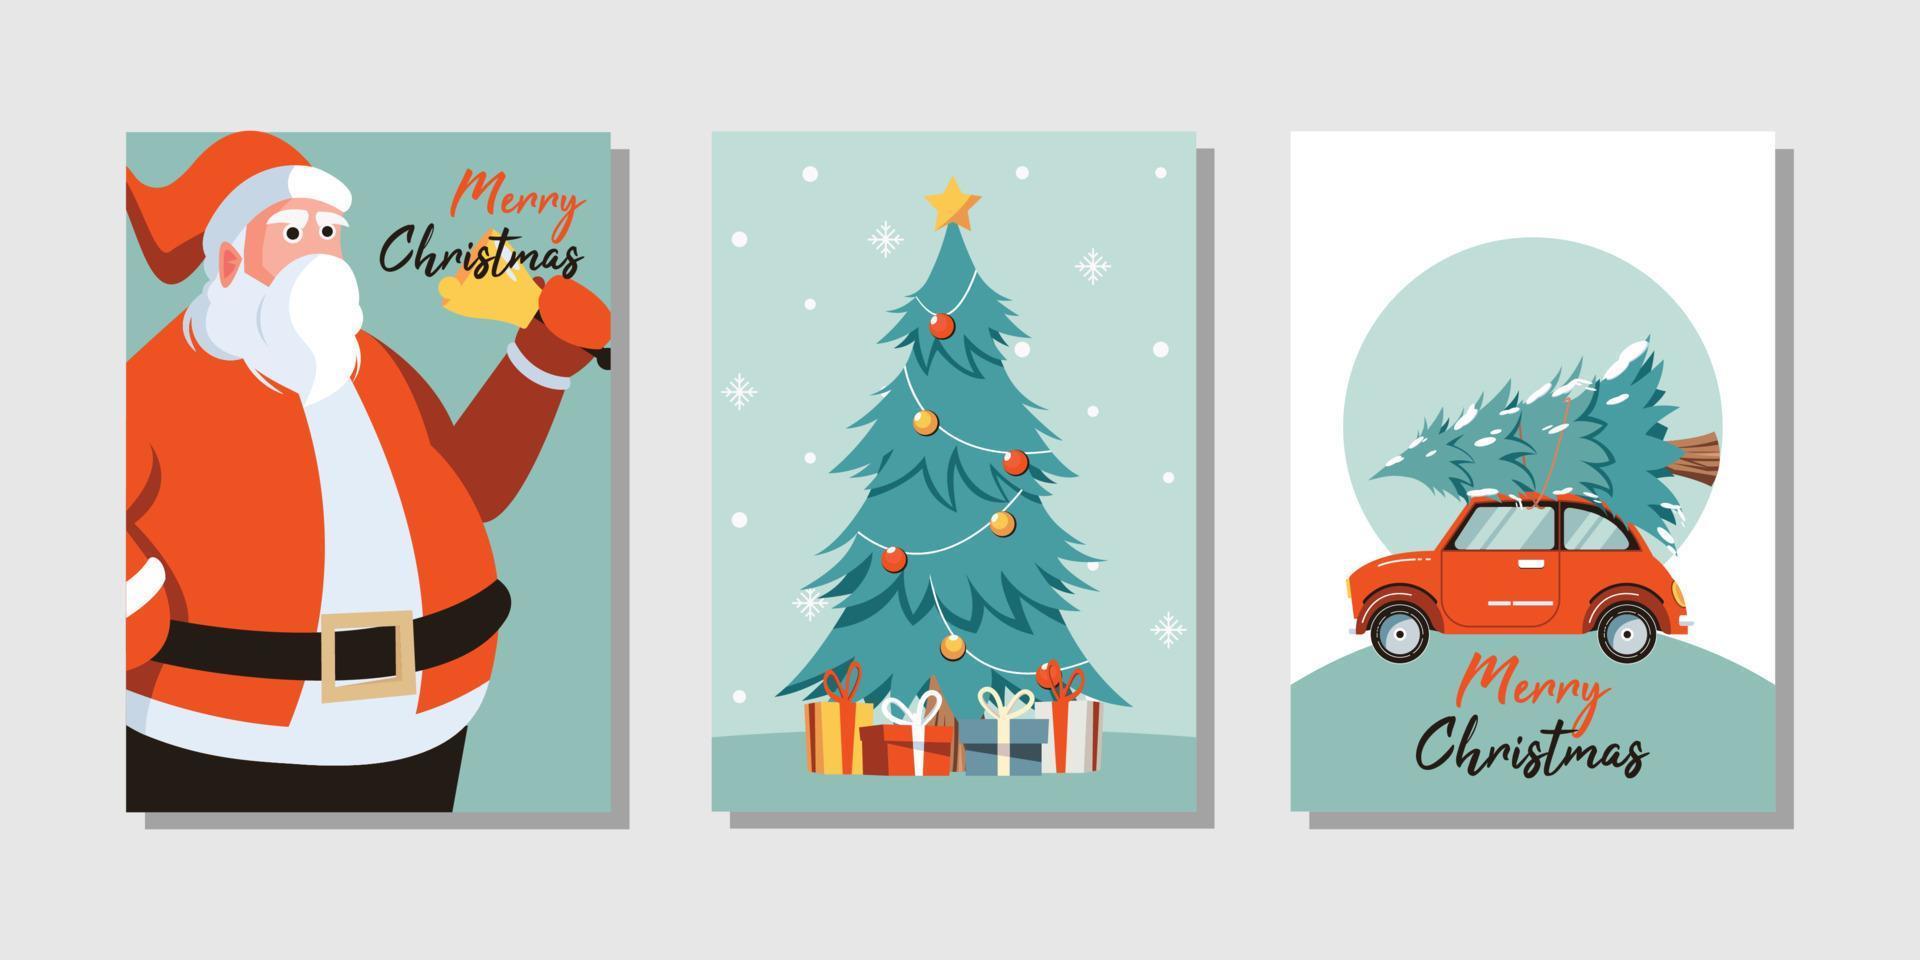 Merry Christmas greeting card with cute christmas tree, santa and car designs vector